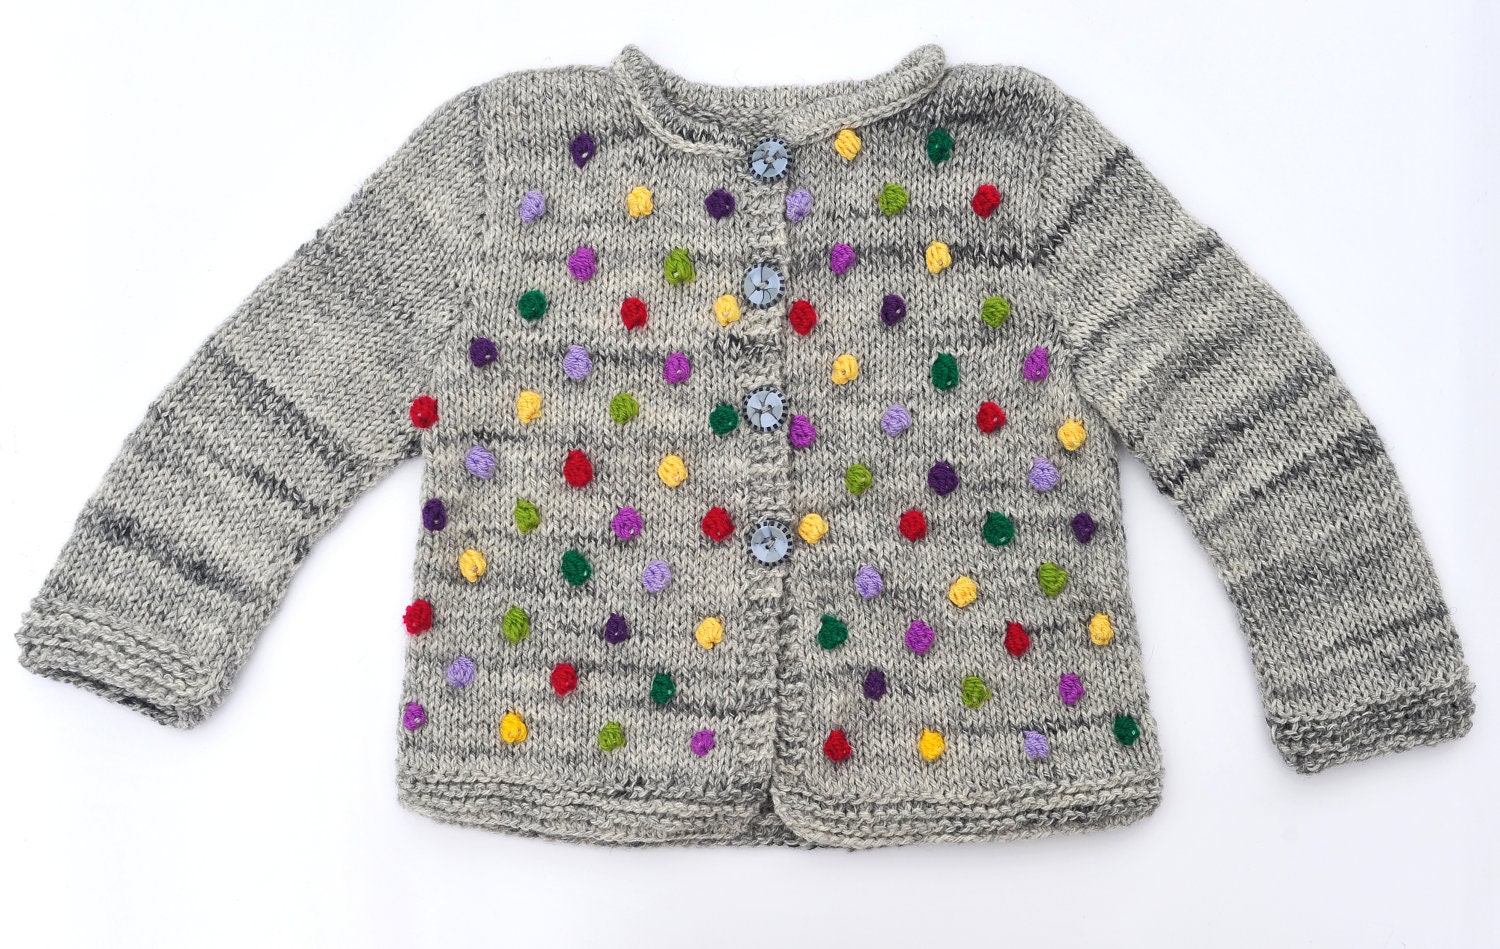 Girls sweater / jacket knitted cardigan grey wool winter warm knitting Red Purple Yellow Green Bobbles, Baby and toddler, Made to order - SweetMeadowSweet